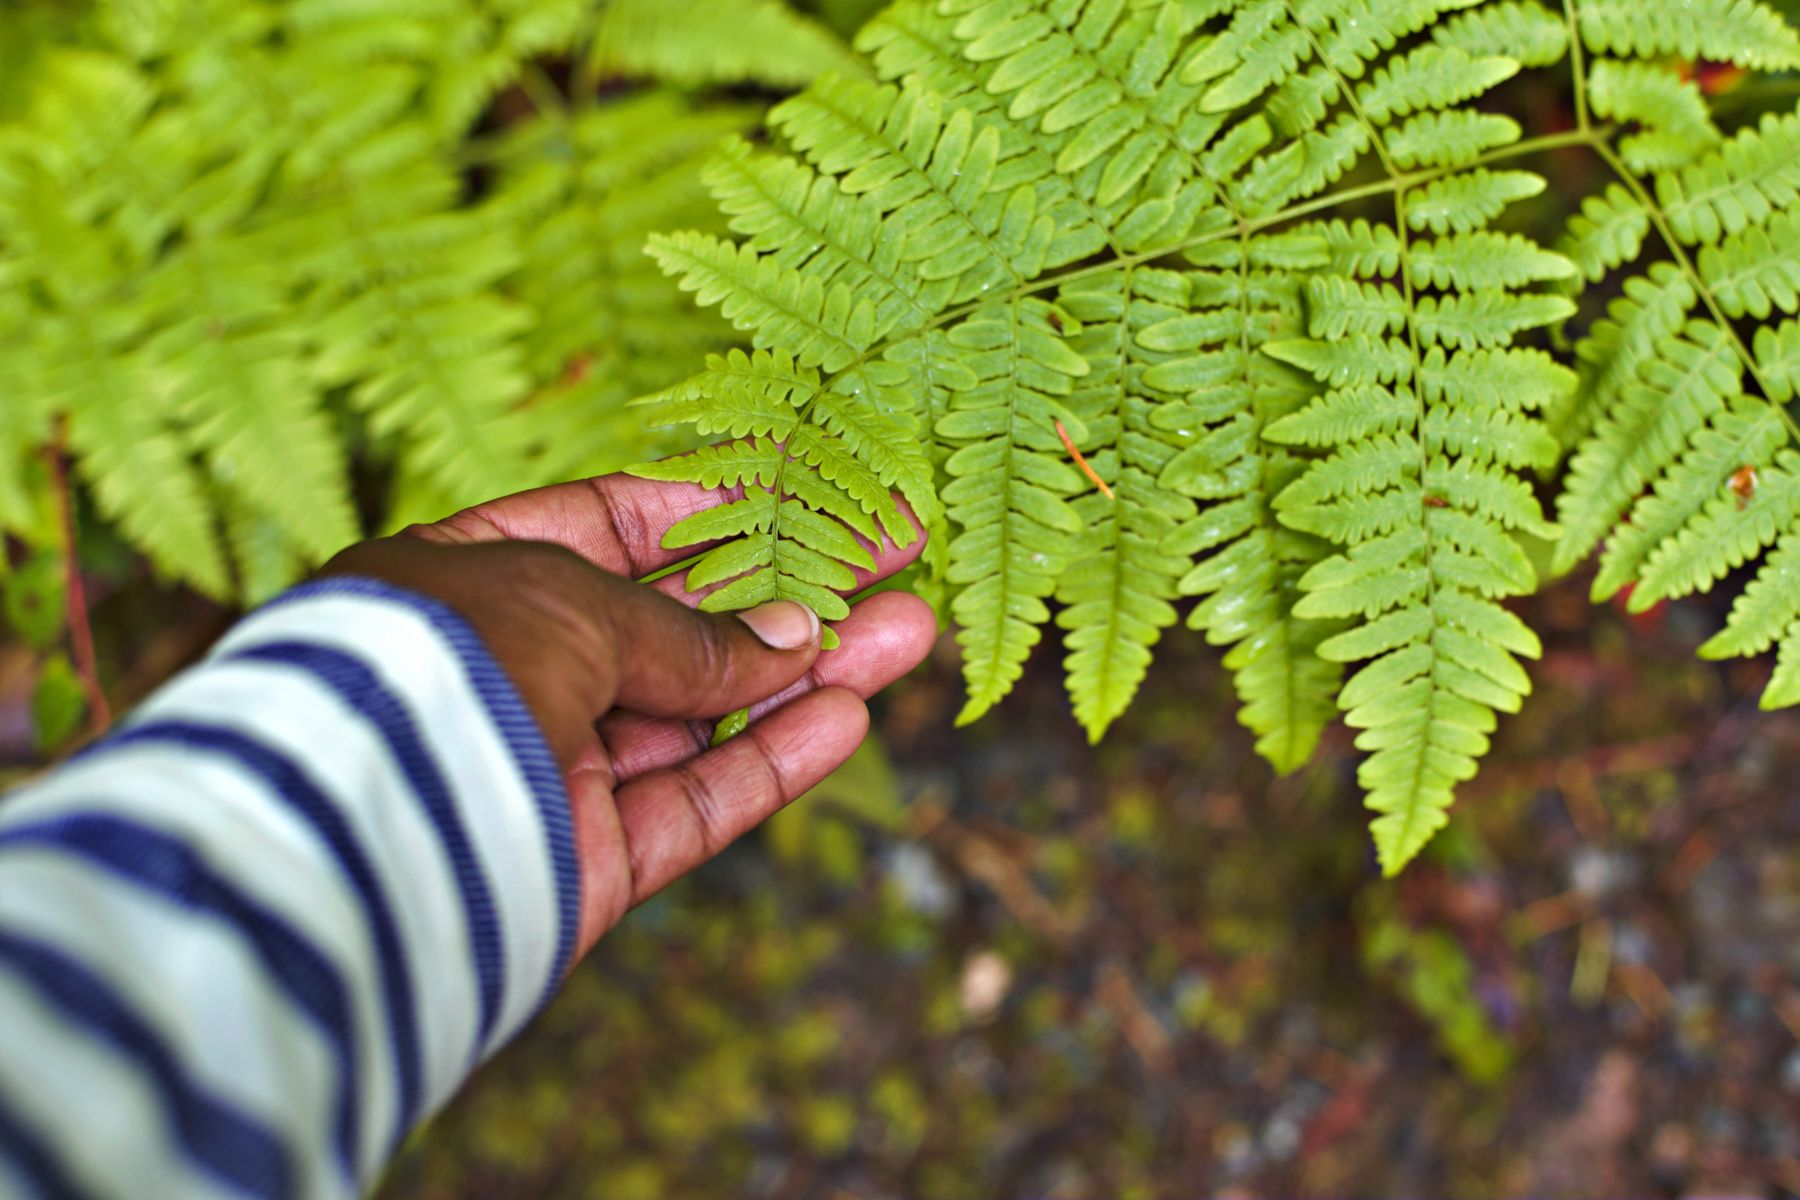 First person perspective of a hand touching a fern.